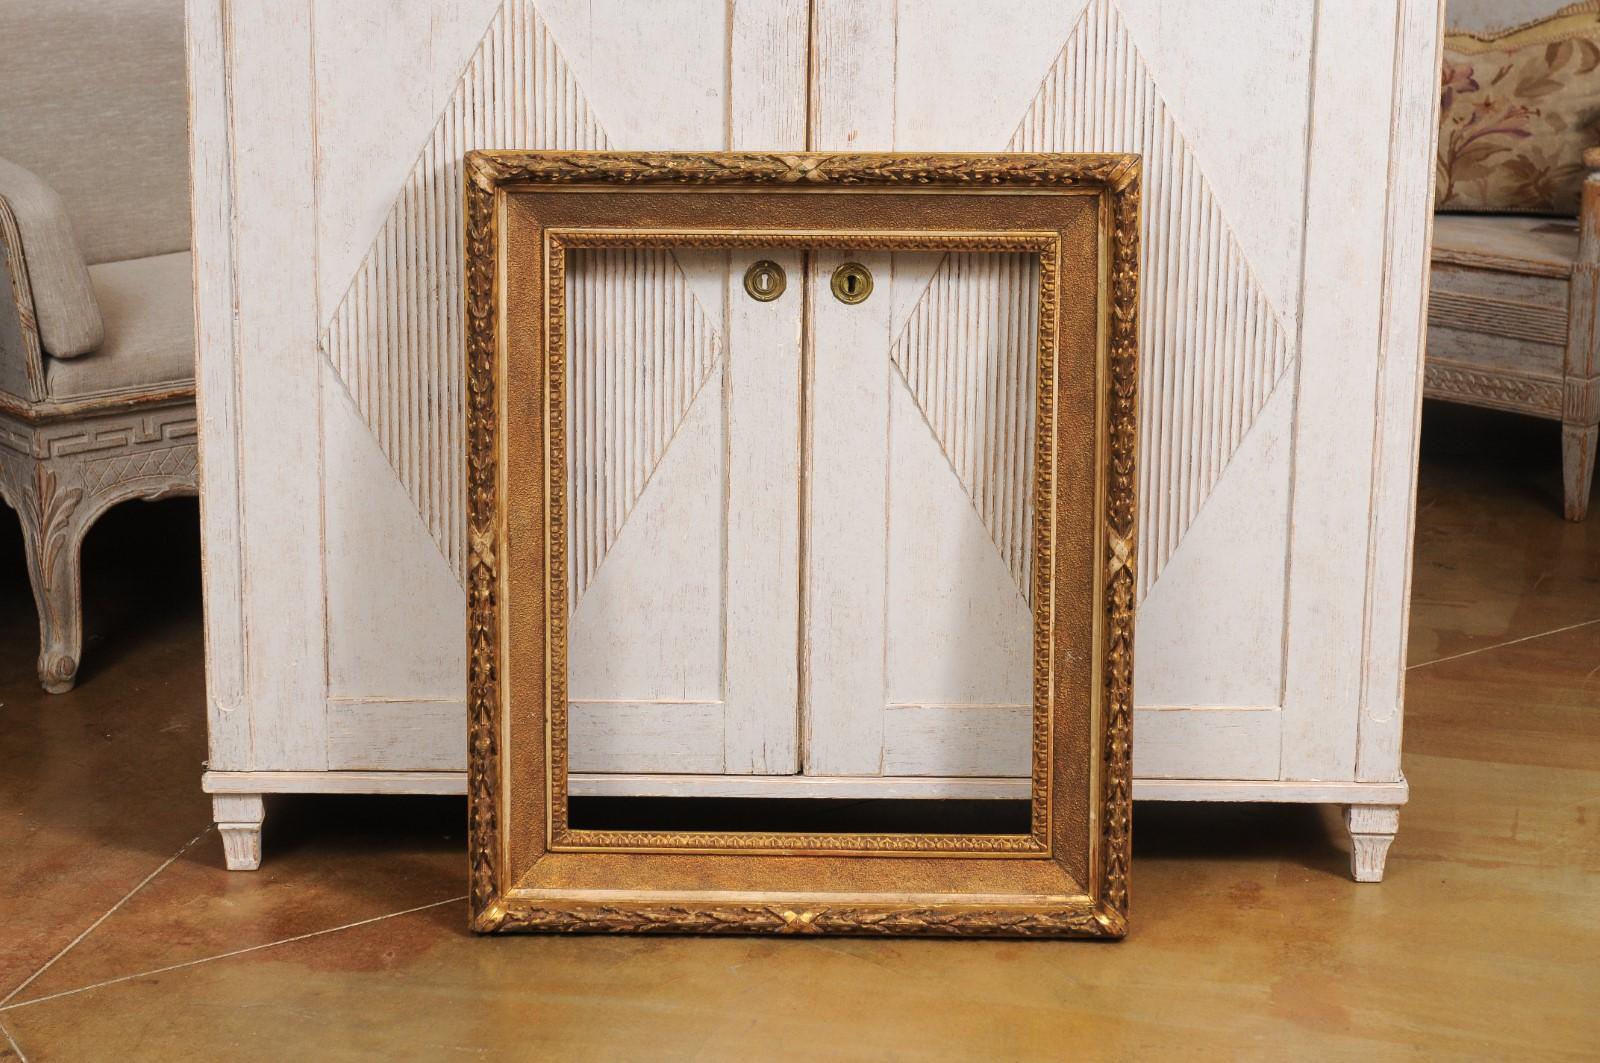 Italian 19th Century Giltwood Frame with Carved Foliage and Rais-de-Cœur In Good Condition For Sale In Atlanta, GA